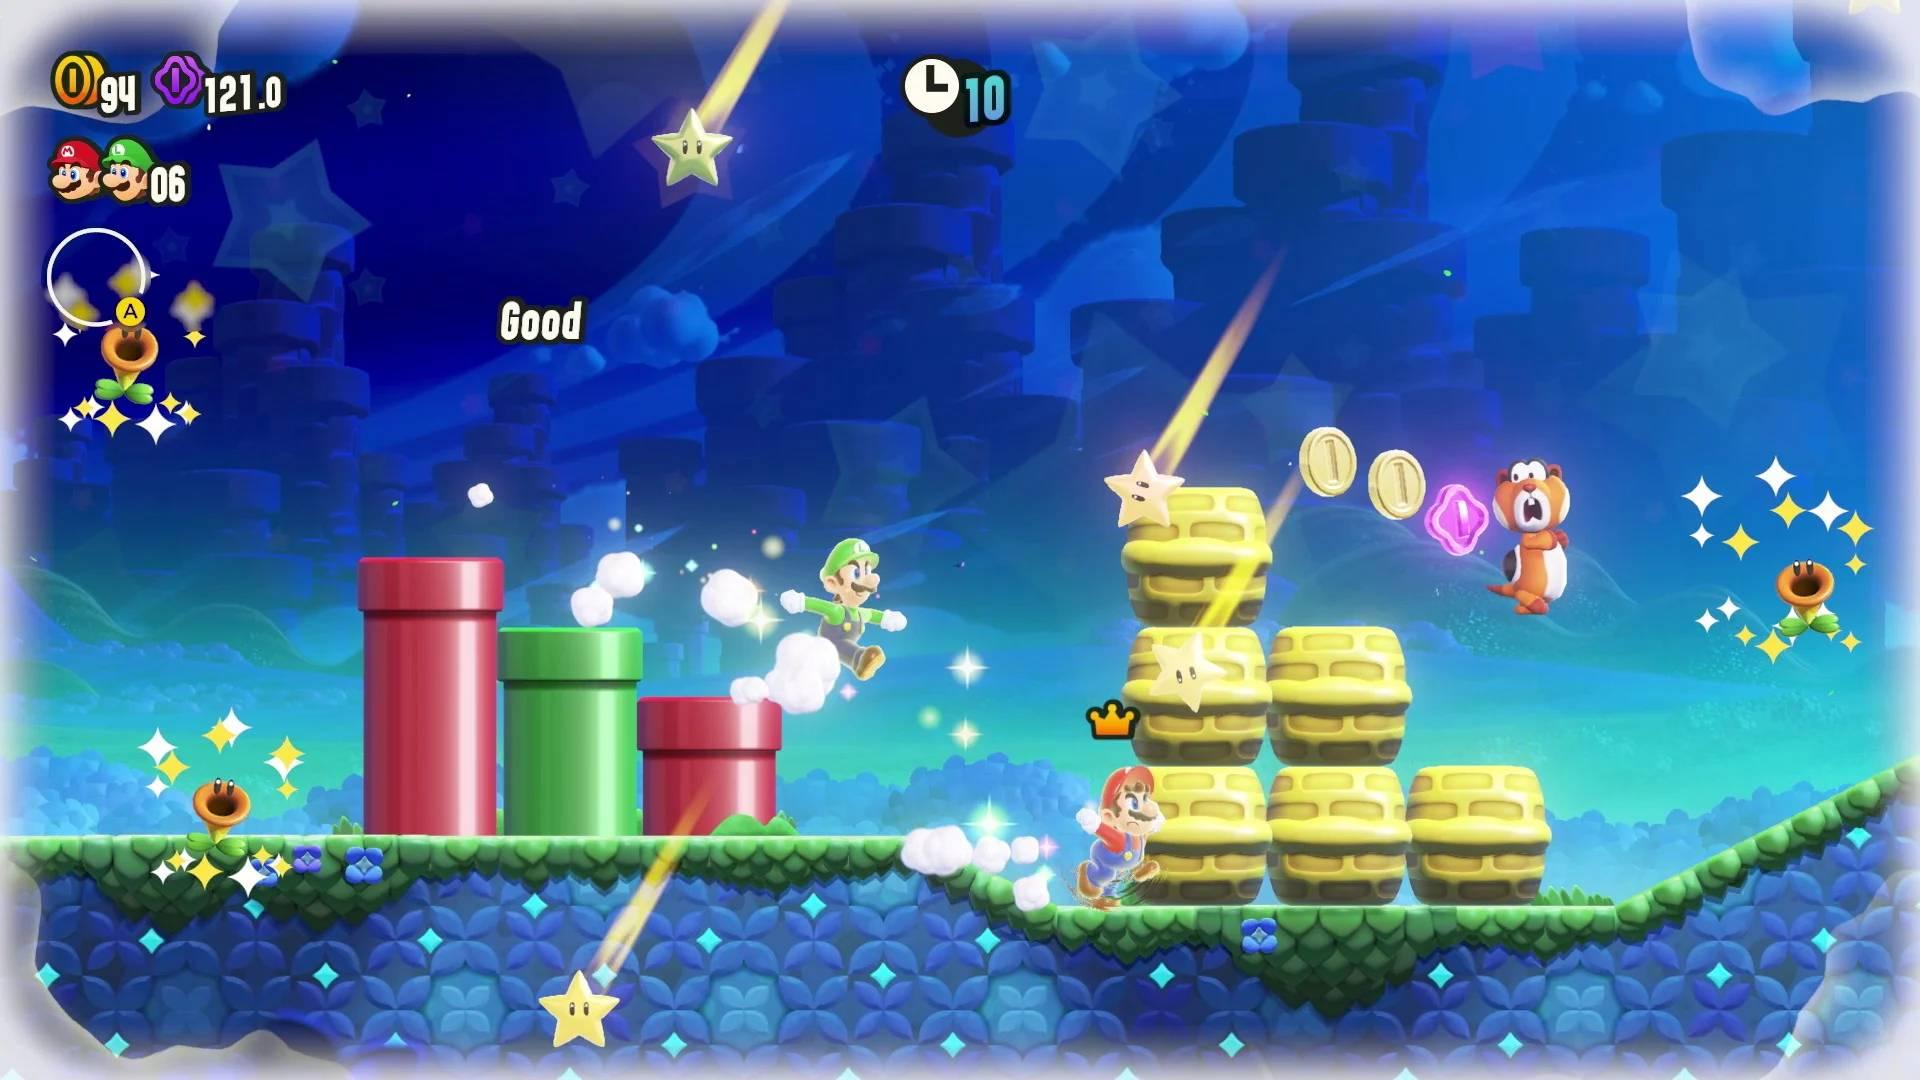 Super Mario Bros. Wonder review: one of the most joyous games I've